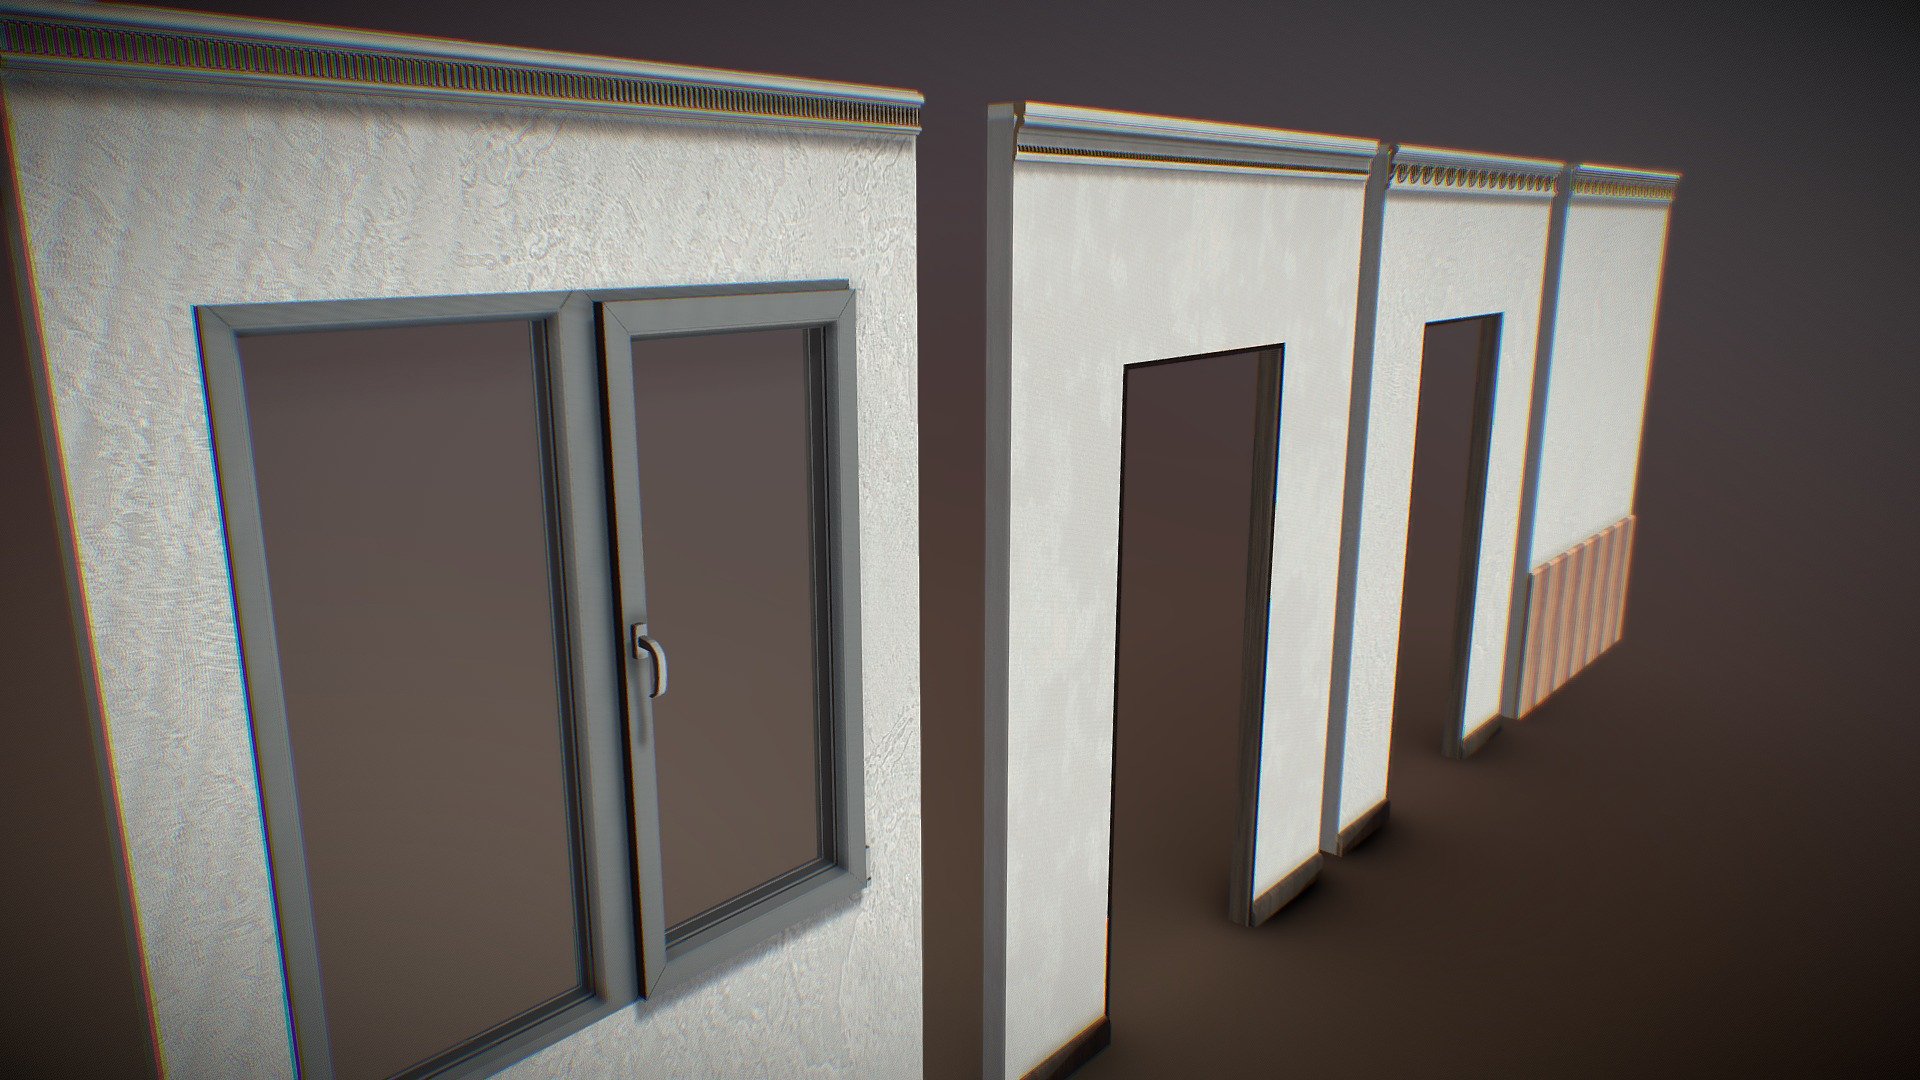 High Quality and detailed Modular Wall Building Pack.

Models shown are for display purposes.
The meshes are seperated in the download

Includes 4 Different designs
All 4 with 3 building Sets - Doorway, Window,Straight Walls
UVs Included.
Import into UE4/Unity with &ldquo;Merge mesh